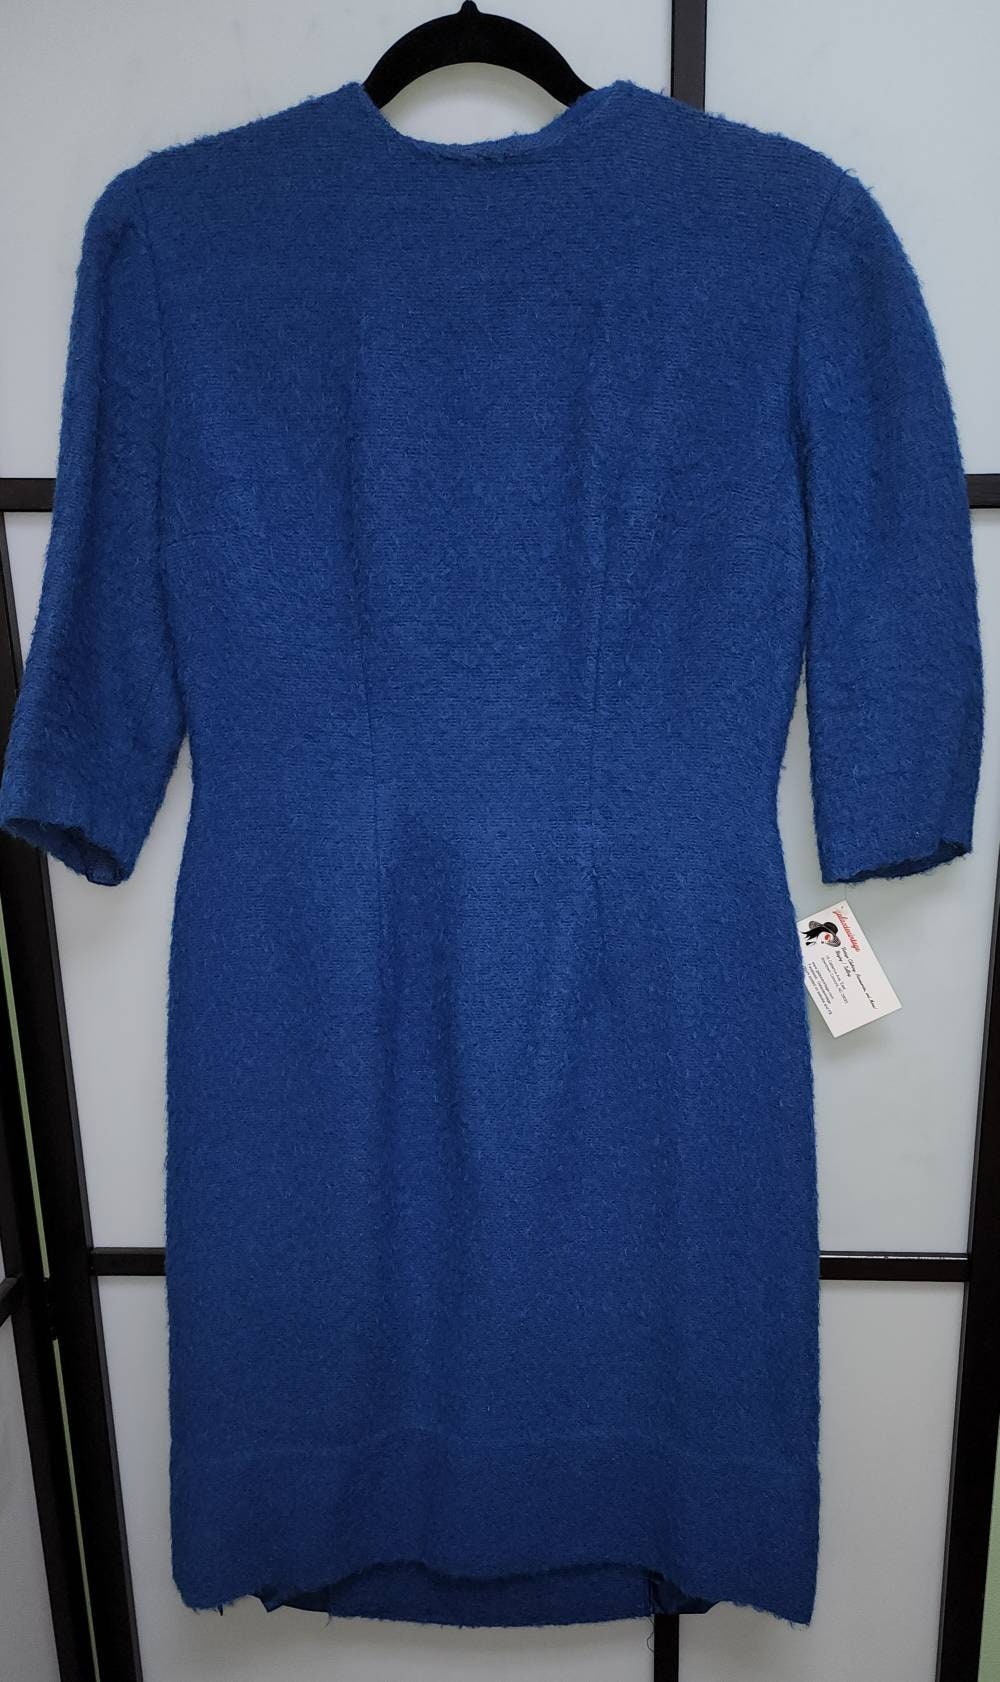 Vintage Wool Dress 1960s Blue Mohair Wool Wiggle Dress Darted Fitted Mid Century Rockabilly M L